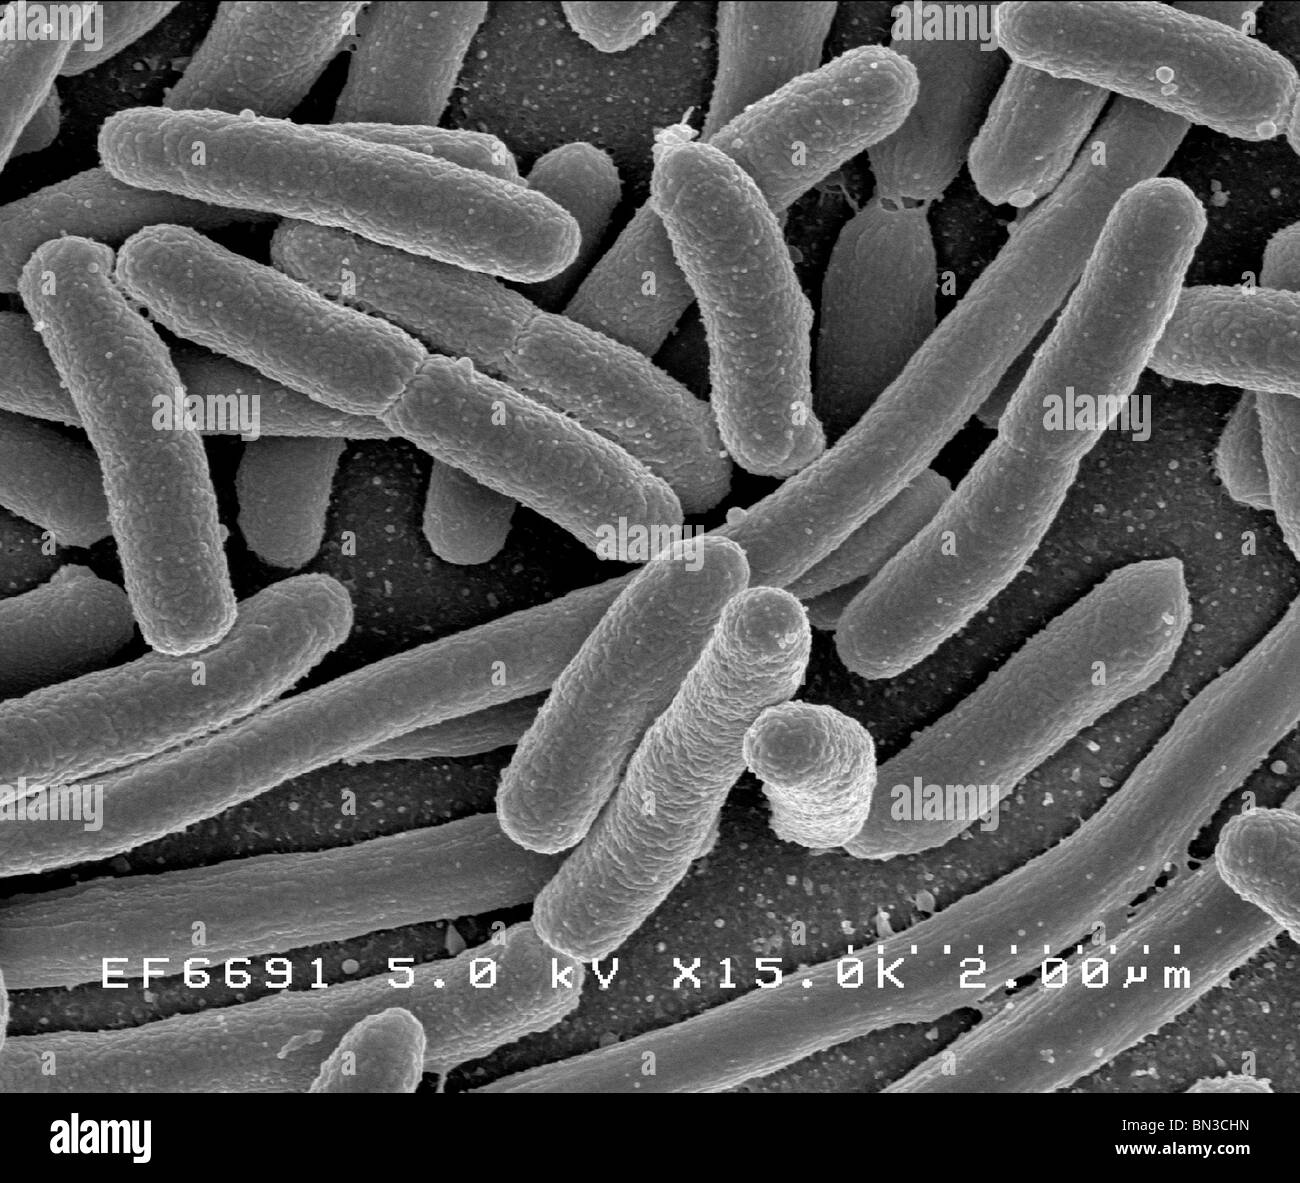 Scanning electron micrograph of Escherichia coli, grown in culture and adhered to a coverslip Stock Photo